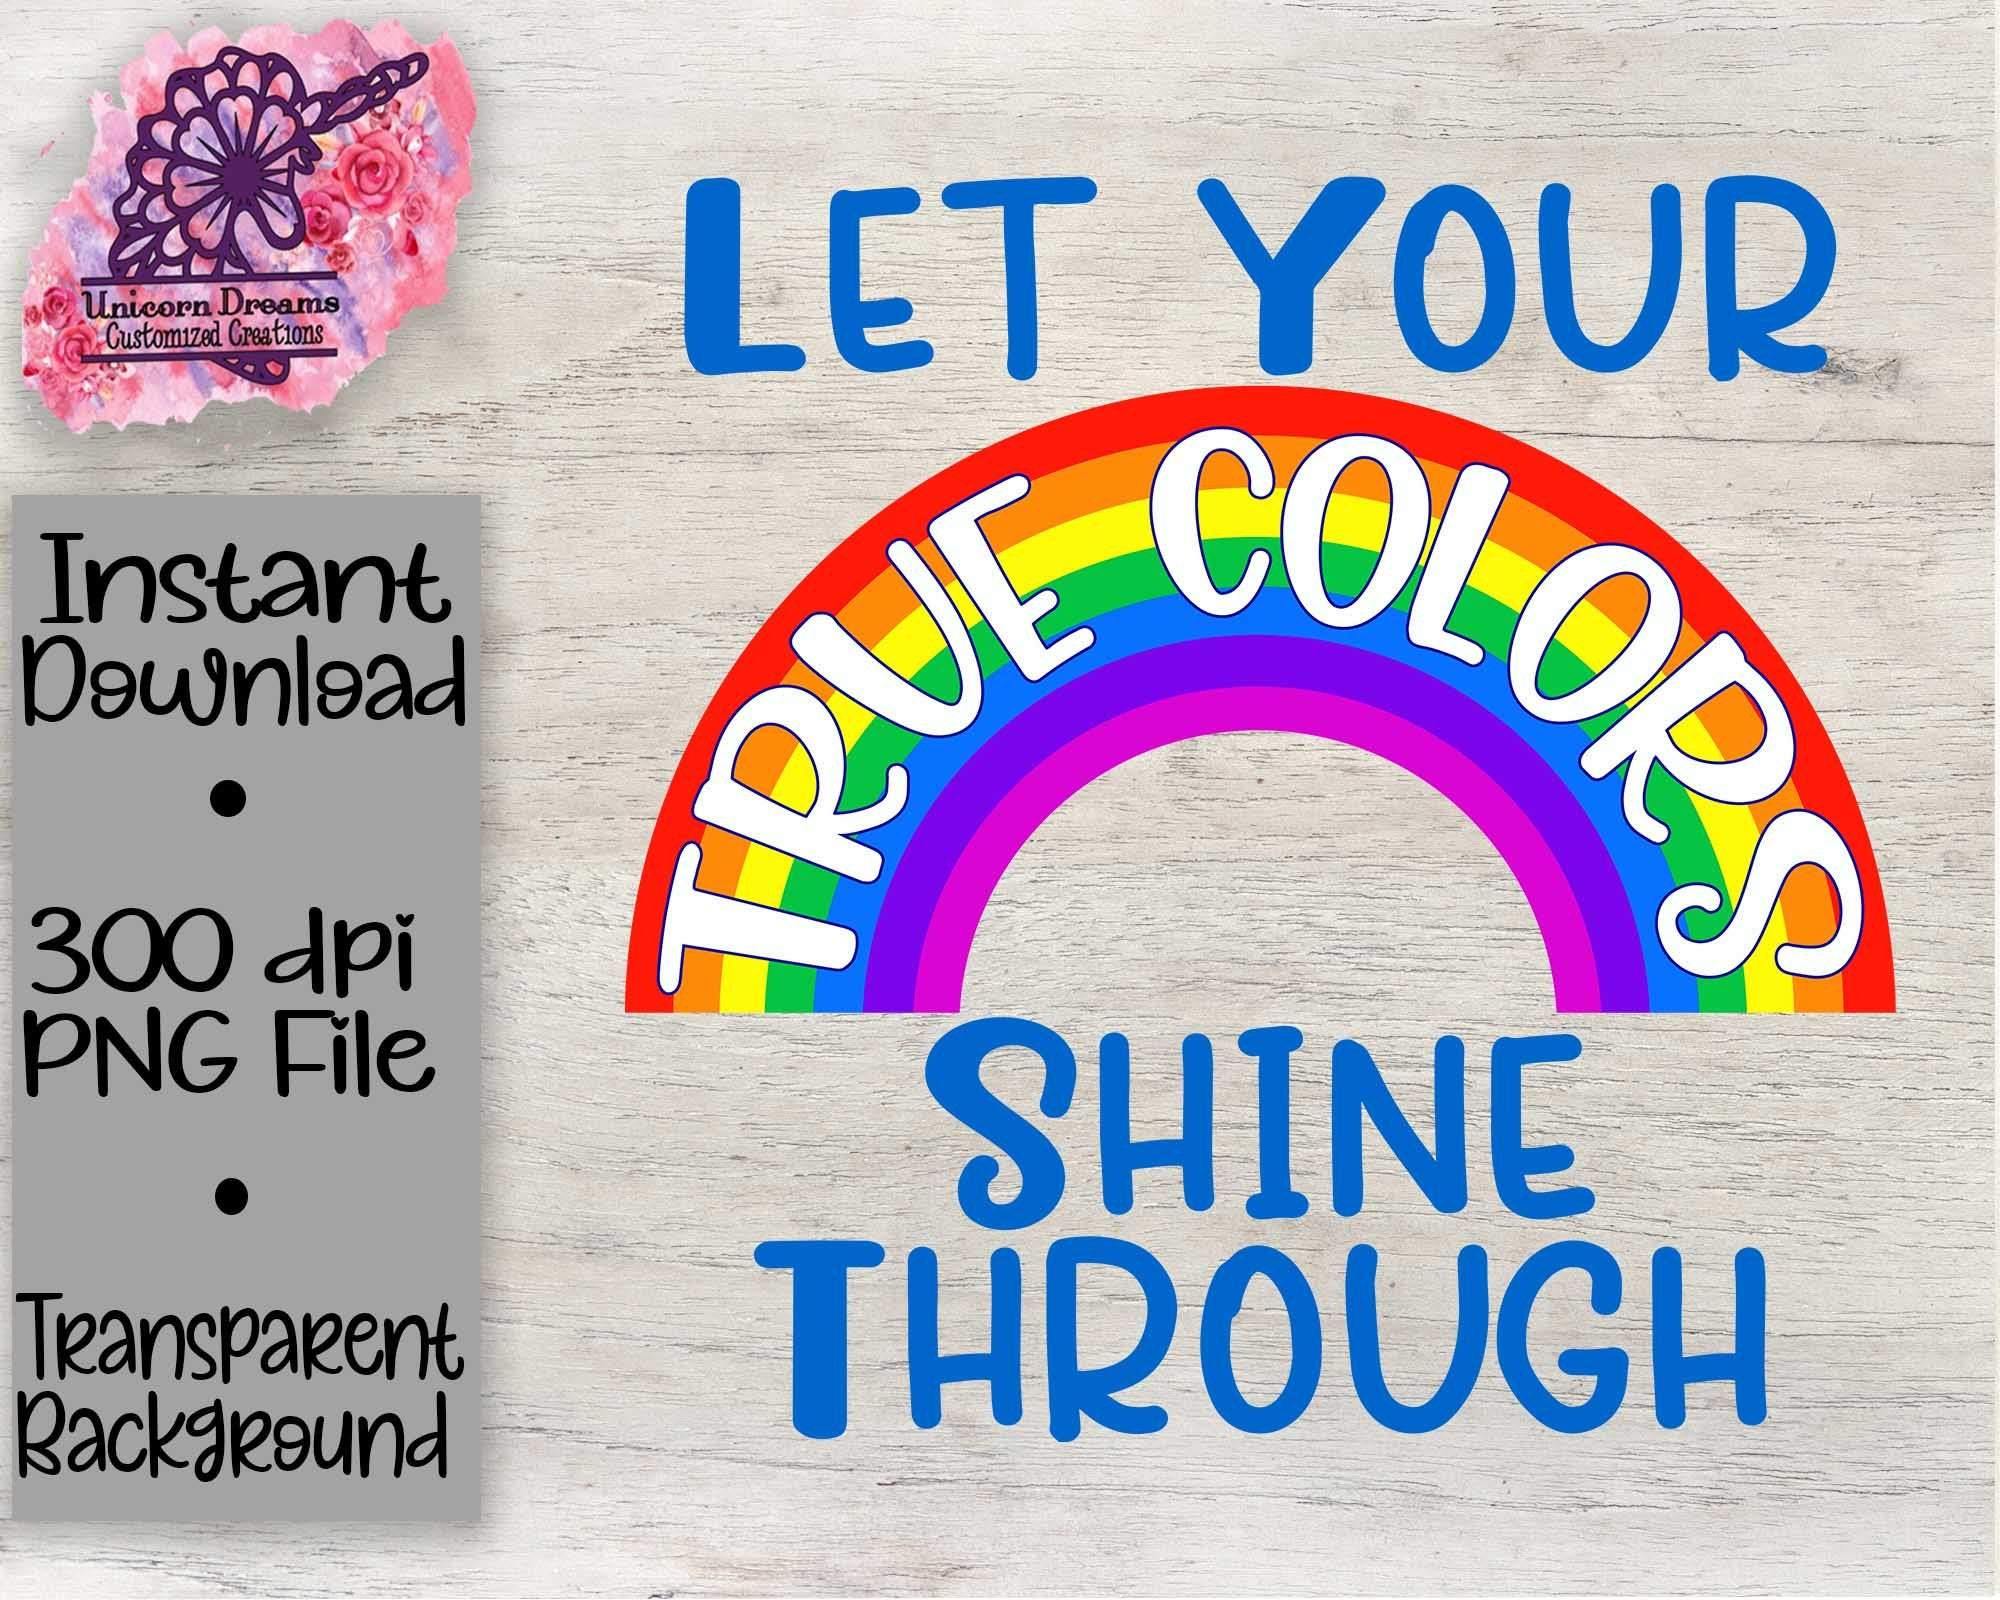 Let Your True Colors Shine Through PNG Digital Download - Unicorn Dreams Customized Creations